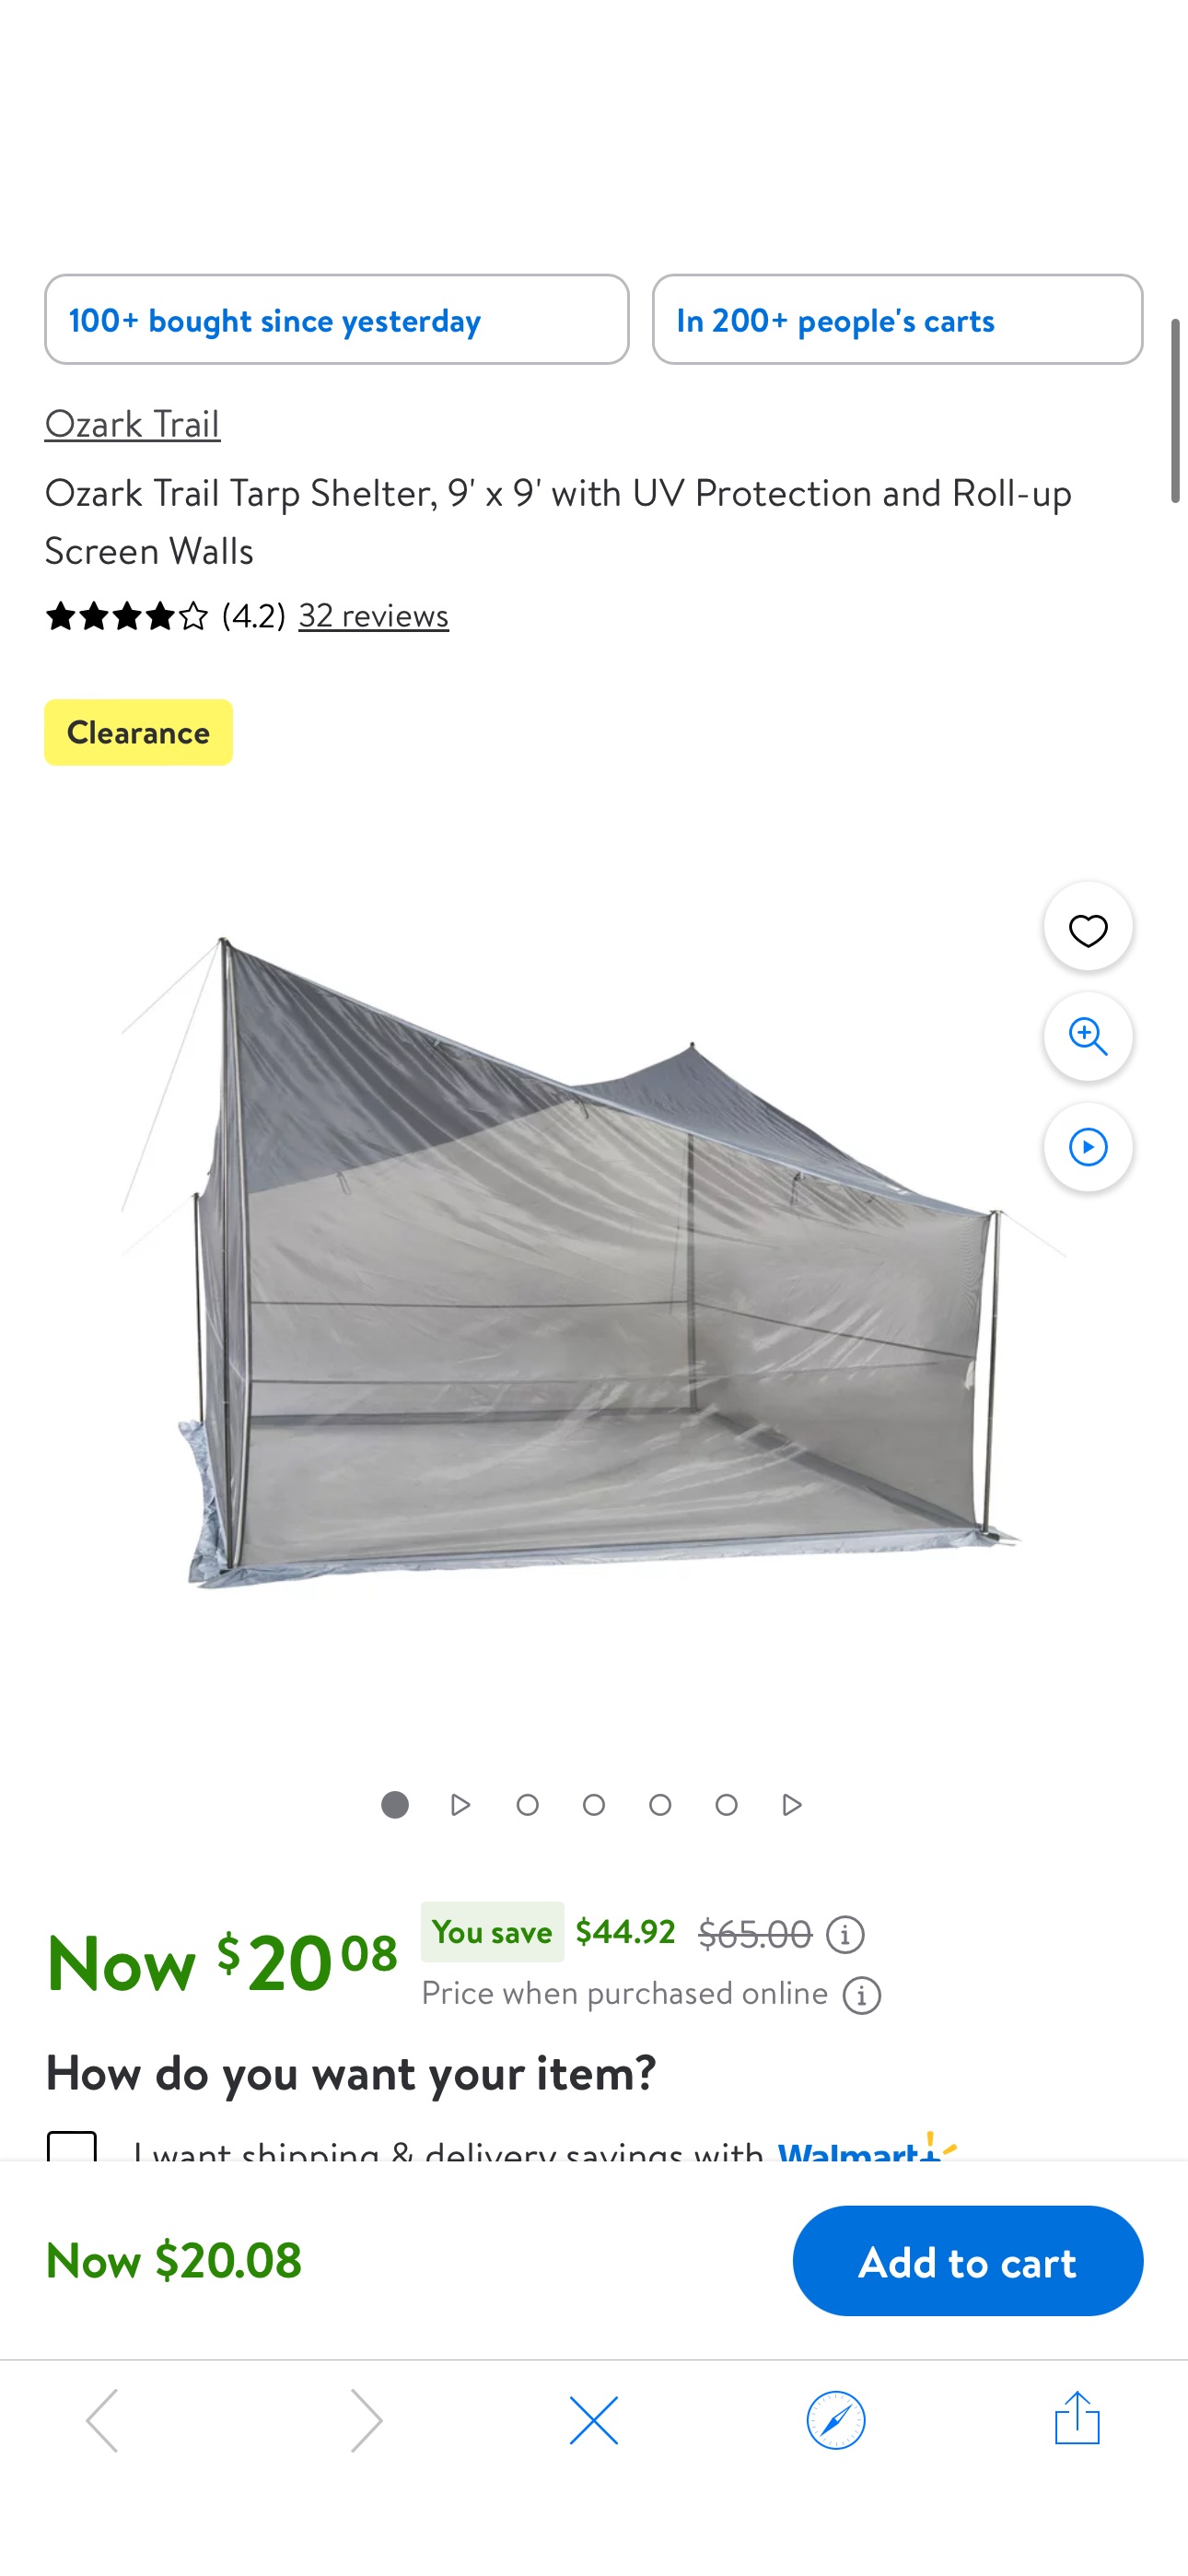 Ozark Trail Tarp Shelter, 9' x 9' with UV Protection and Roll-up Screen Walls - Walmart.com